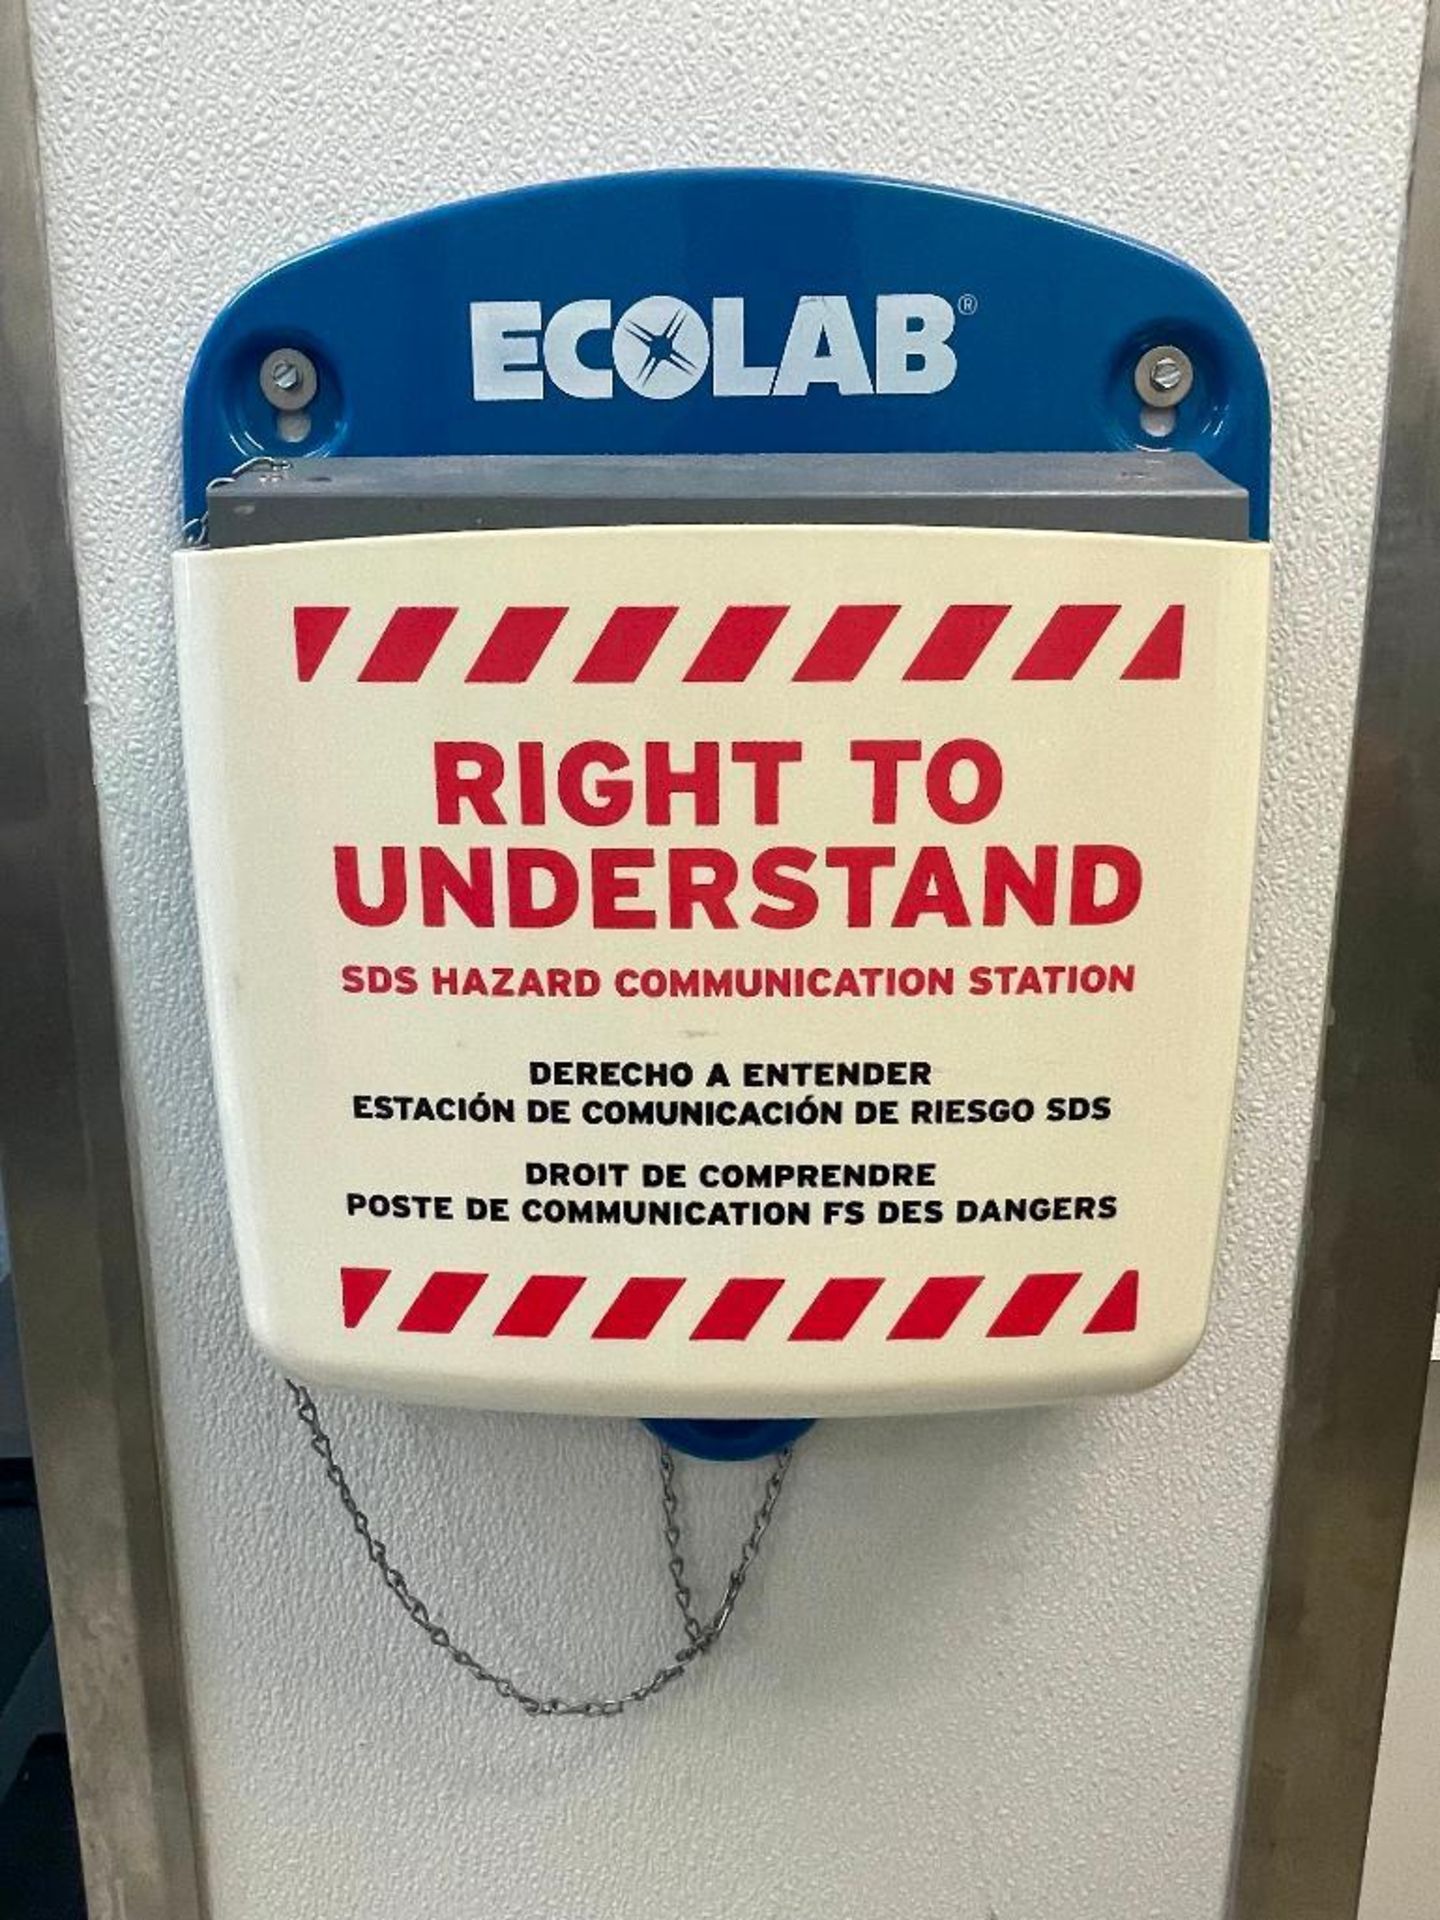 DESCRIPTION: ECOLAB WALL MOUNTED SAFETY STATION BRAND / MODEL: ECOLAB LOCATION: 4811 E. Grant Rd QTY